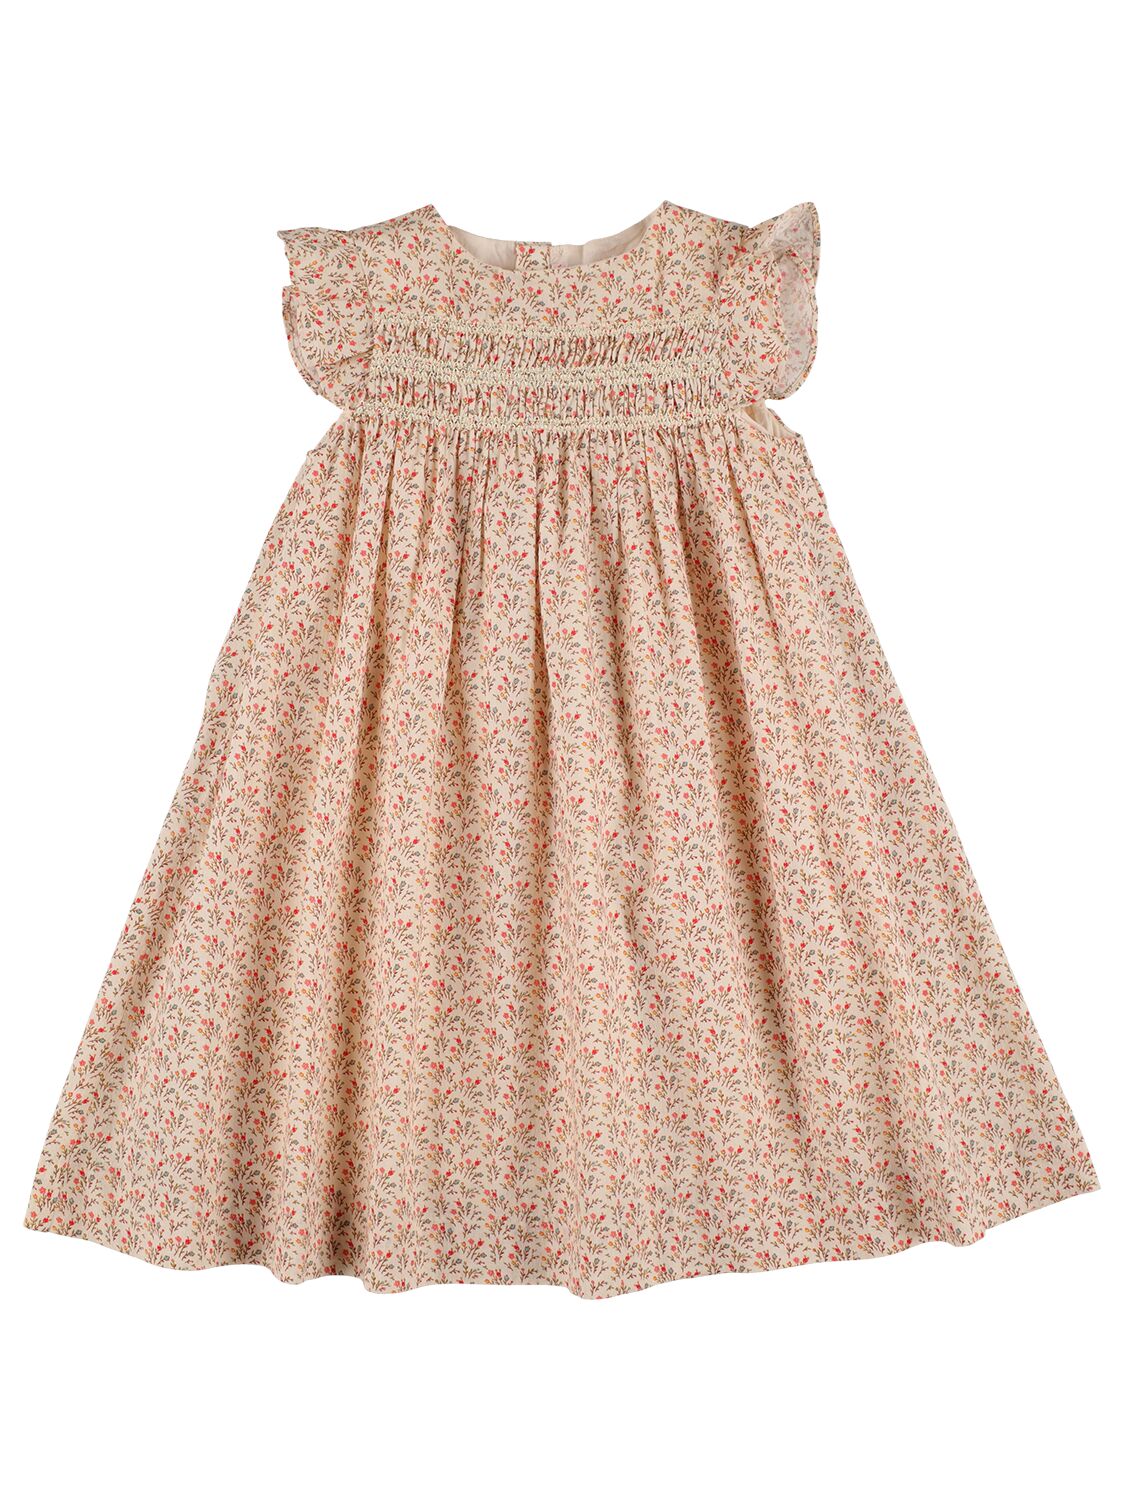 Bonpoint Kids' Printed Cotton Dress W/ Embroidery In 베이지